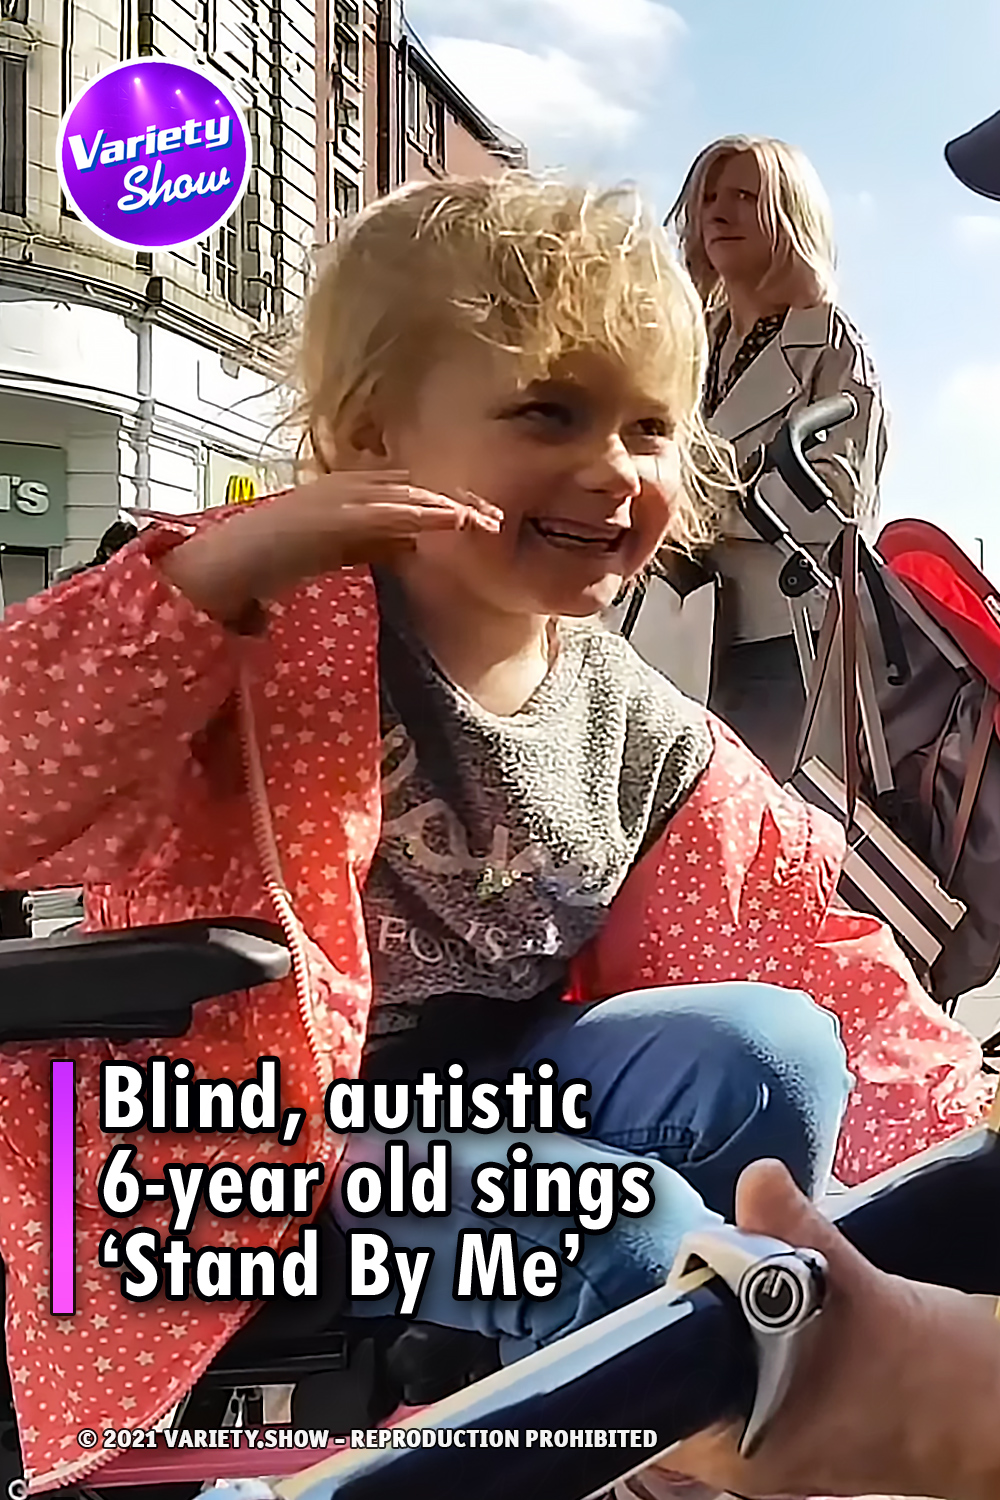 Blind, autistic 6-year old sings ‘Stand By Me’